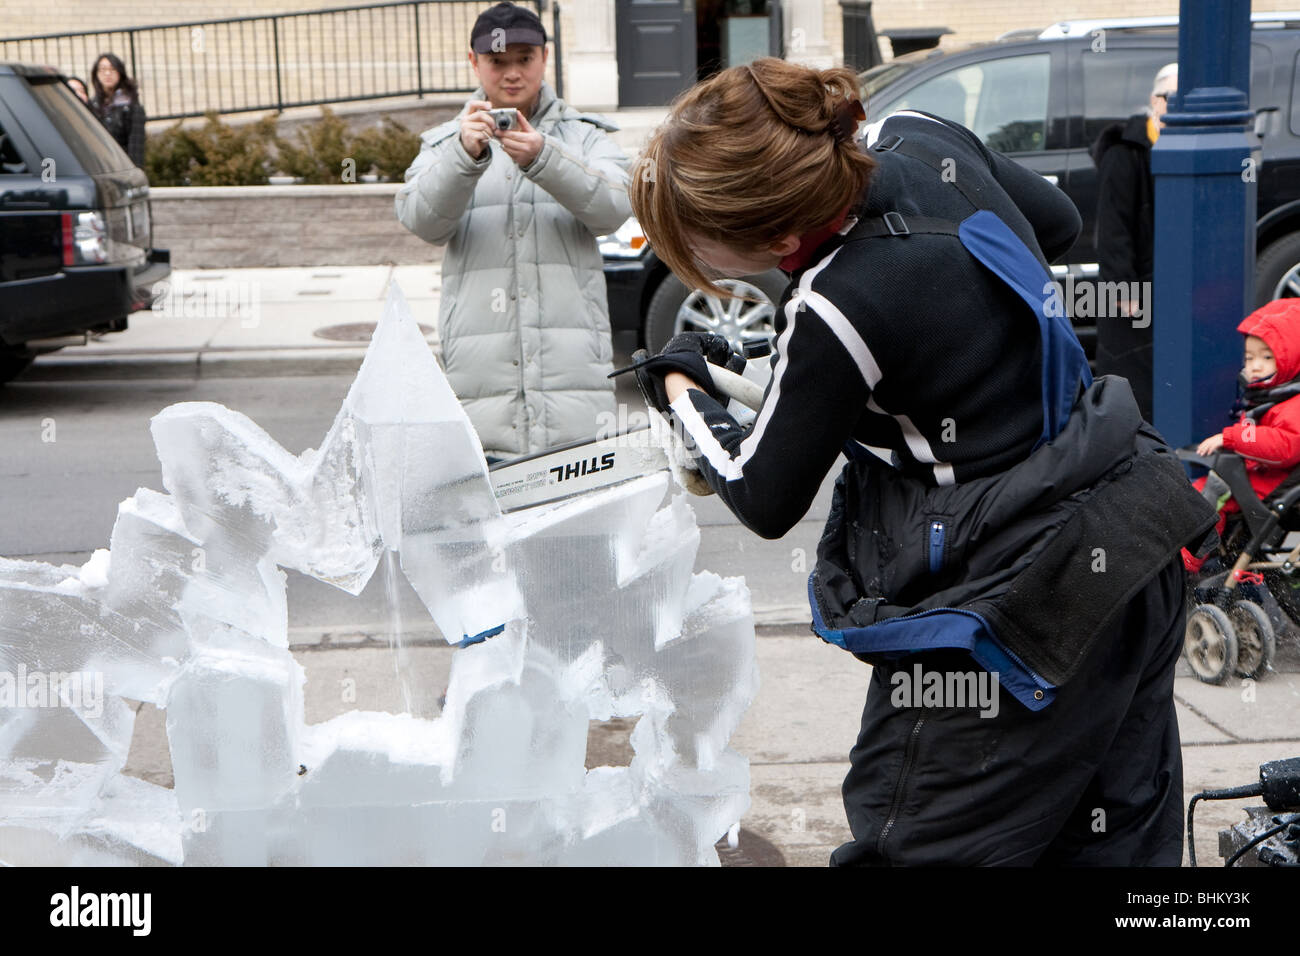 An ice carving artist demonstrating her skill while a bystander looks on Stock Photo